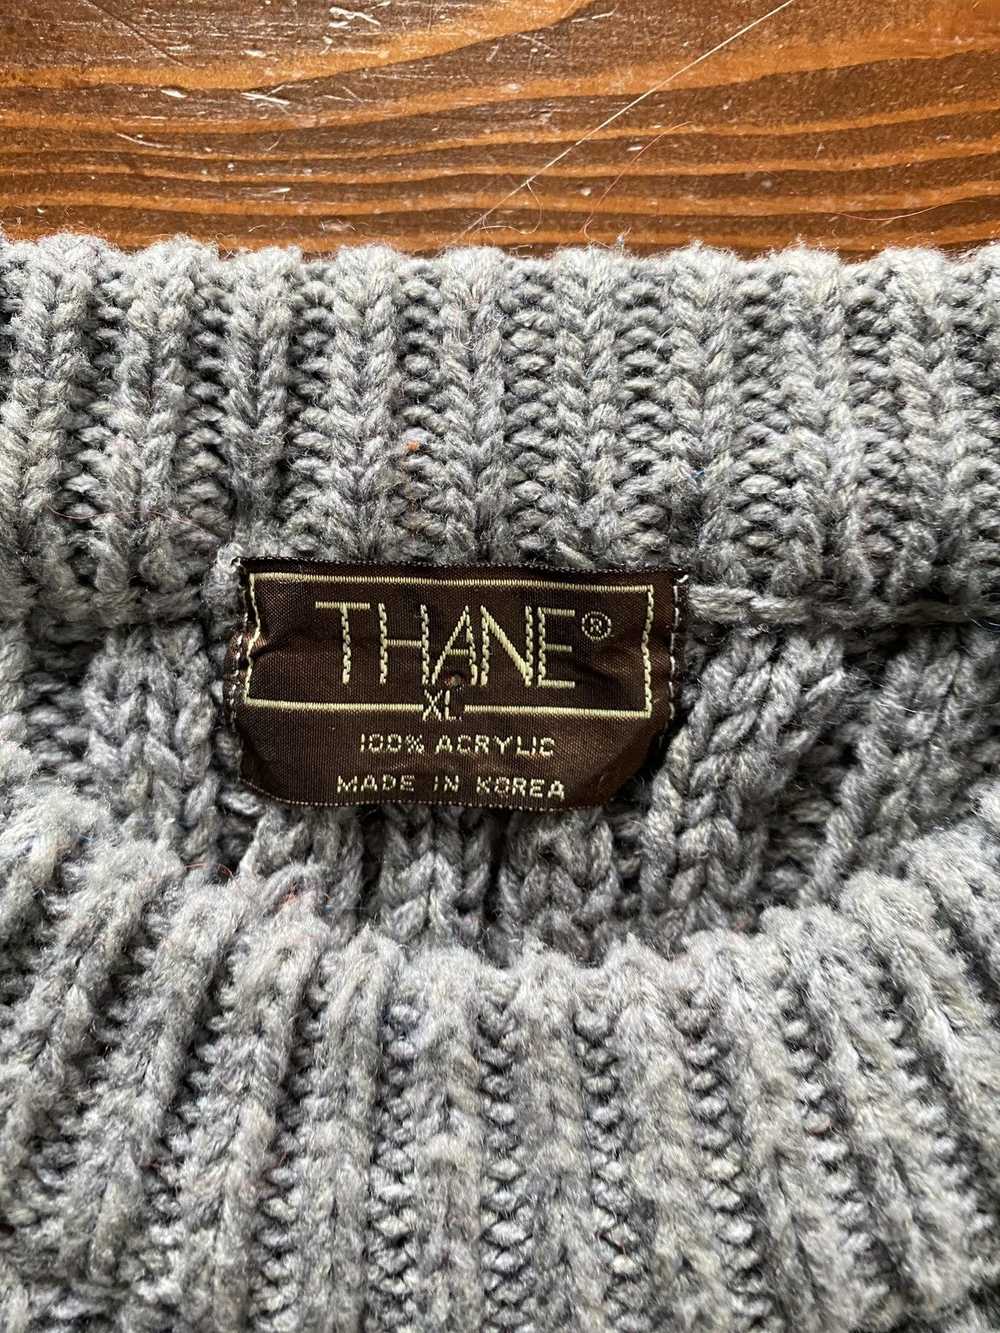 Vintage Vintage 80’s Thane Gray Cable Knit Sweater - image 3